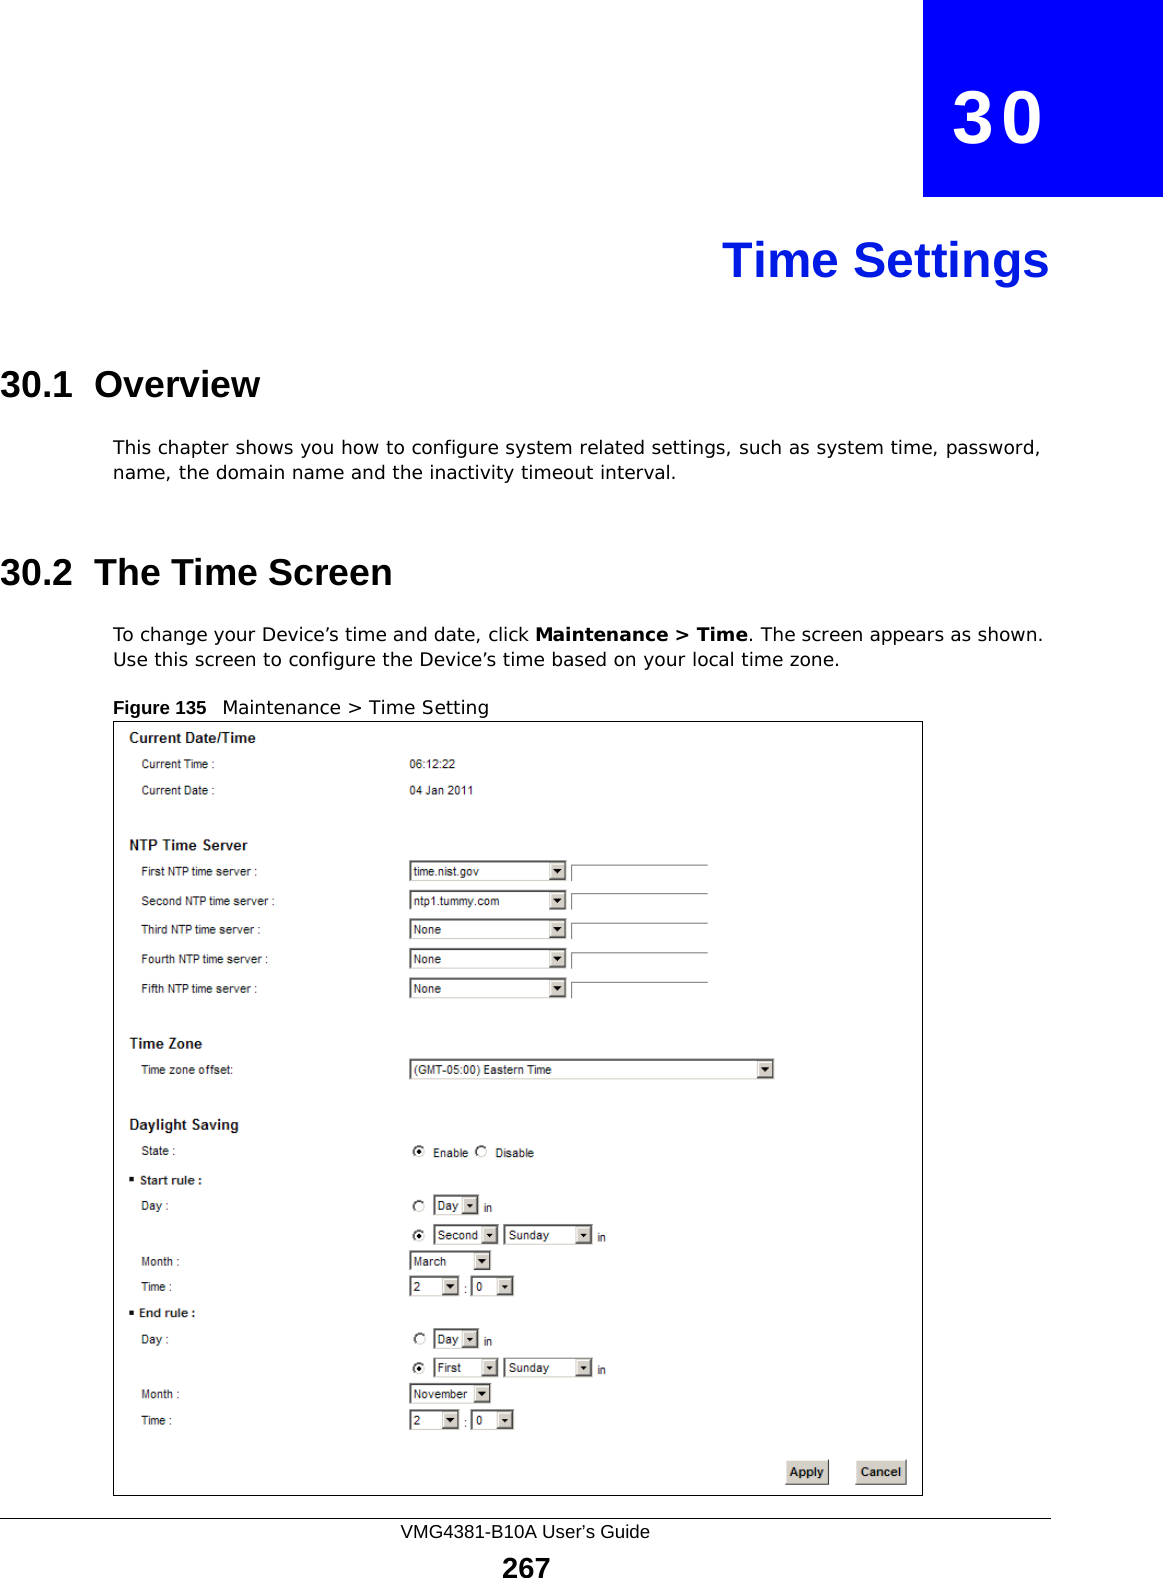 VMG4381-B10A User’s Guide267CHAPTER   30Time Settings30.1  OverviewThis chapter shows you how to configure system related settings, such as system time, password, name, the domain name and the inactivity timeout interval.    30.2  The Time Screen To change your Device’s time and date, click Maintenance &gt; Time. The screen appears as shown. Use this screen to configure the Device’s time based on your local time zone.Figure 135   Maintenance &gt; Time Setting